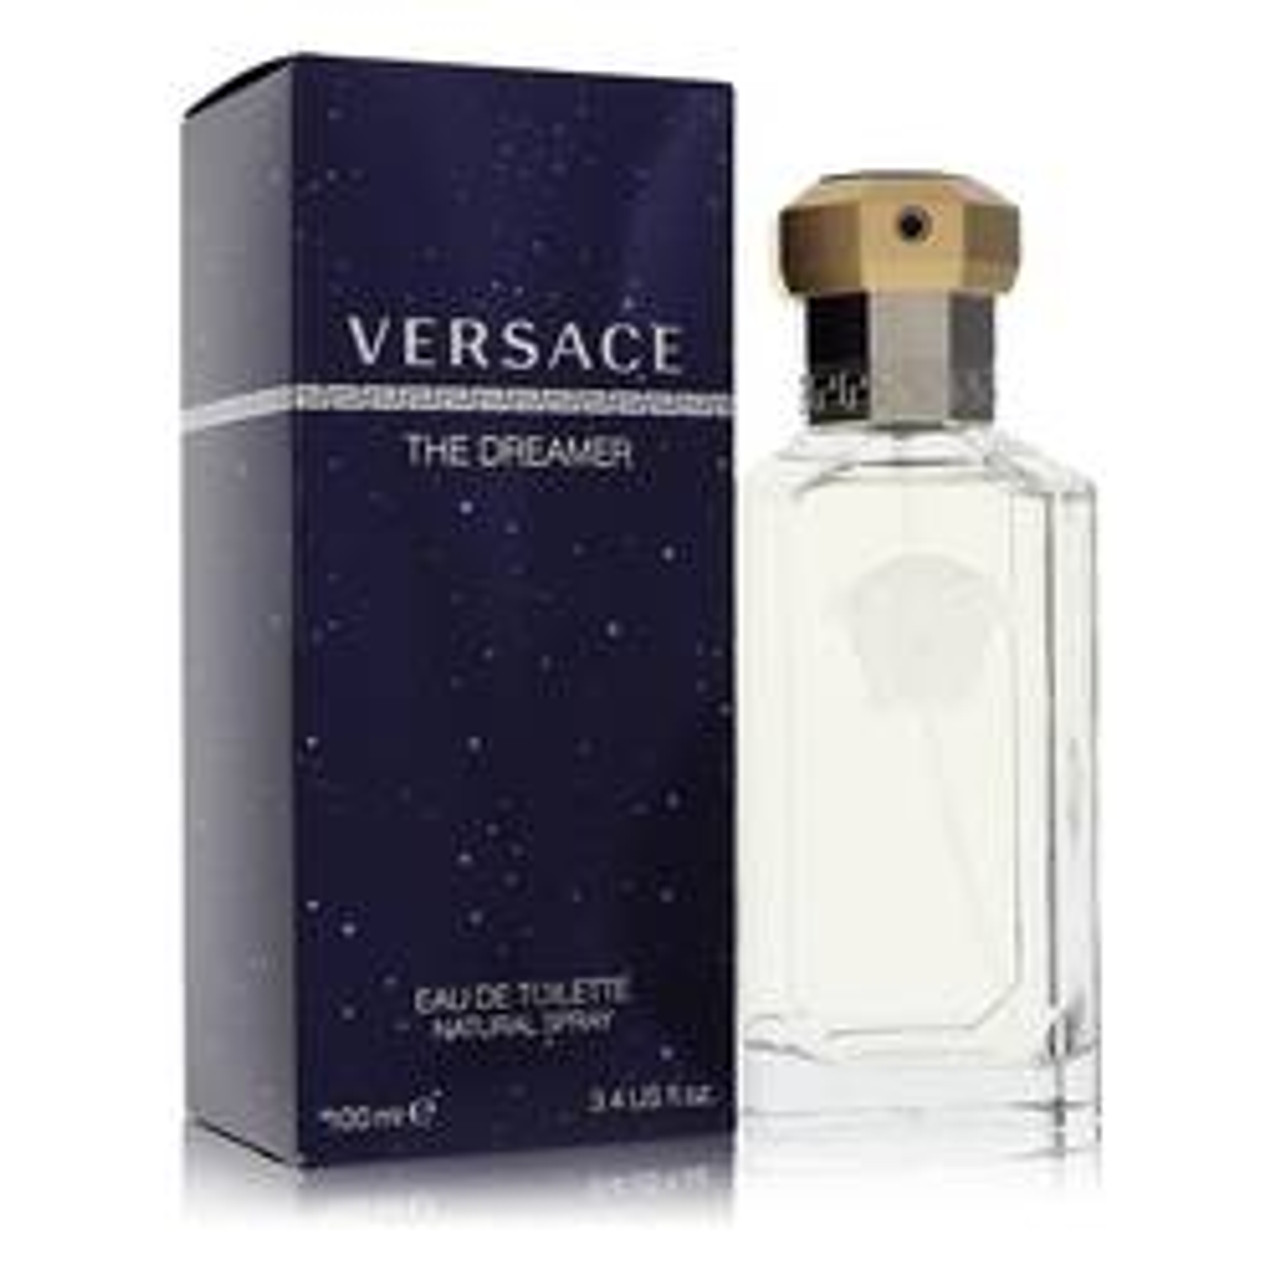 Dreamer Cologne By Versace Eau De Toilette Spray 3.4 oz for Men - [From 136.00 - Choose pk Qty ] - *Ships from Miami